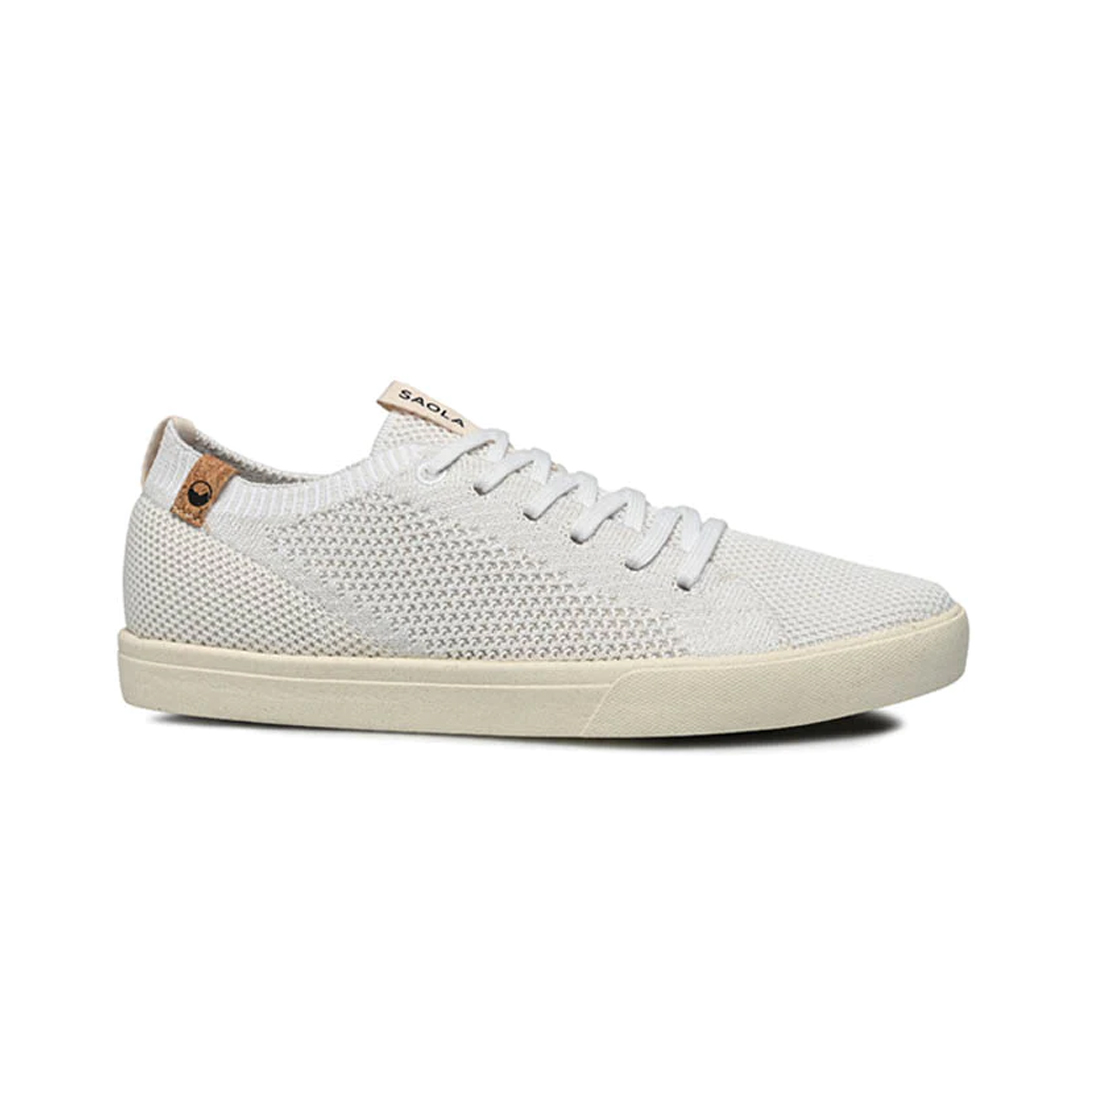 Women's Knit Sneakers White - Cannon I Knitted Shoes